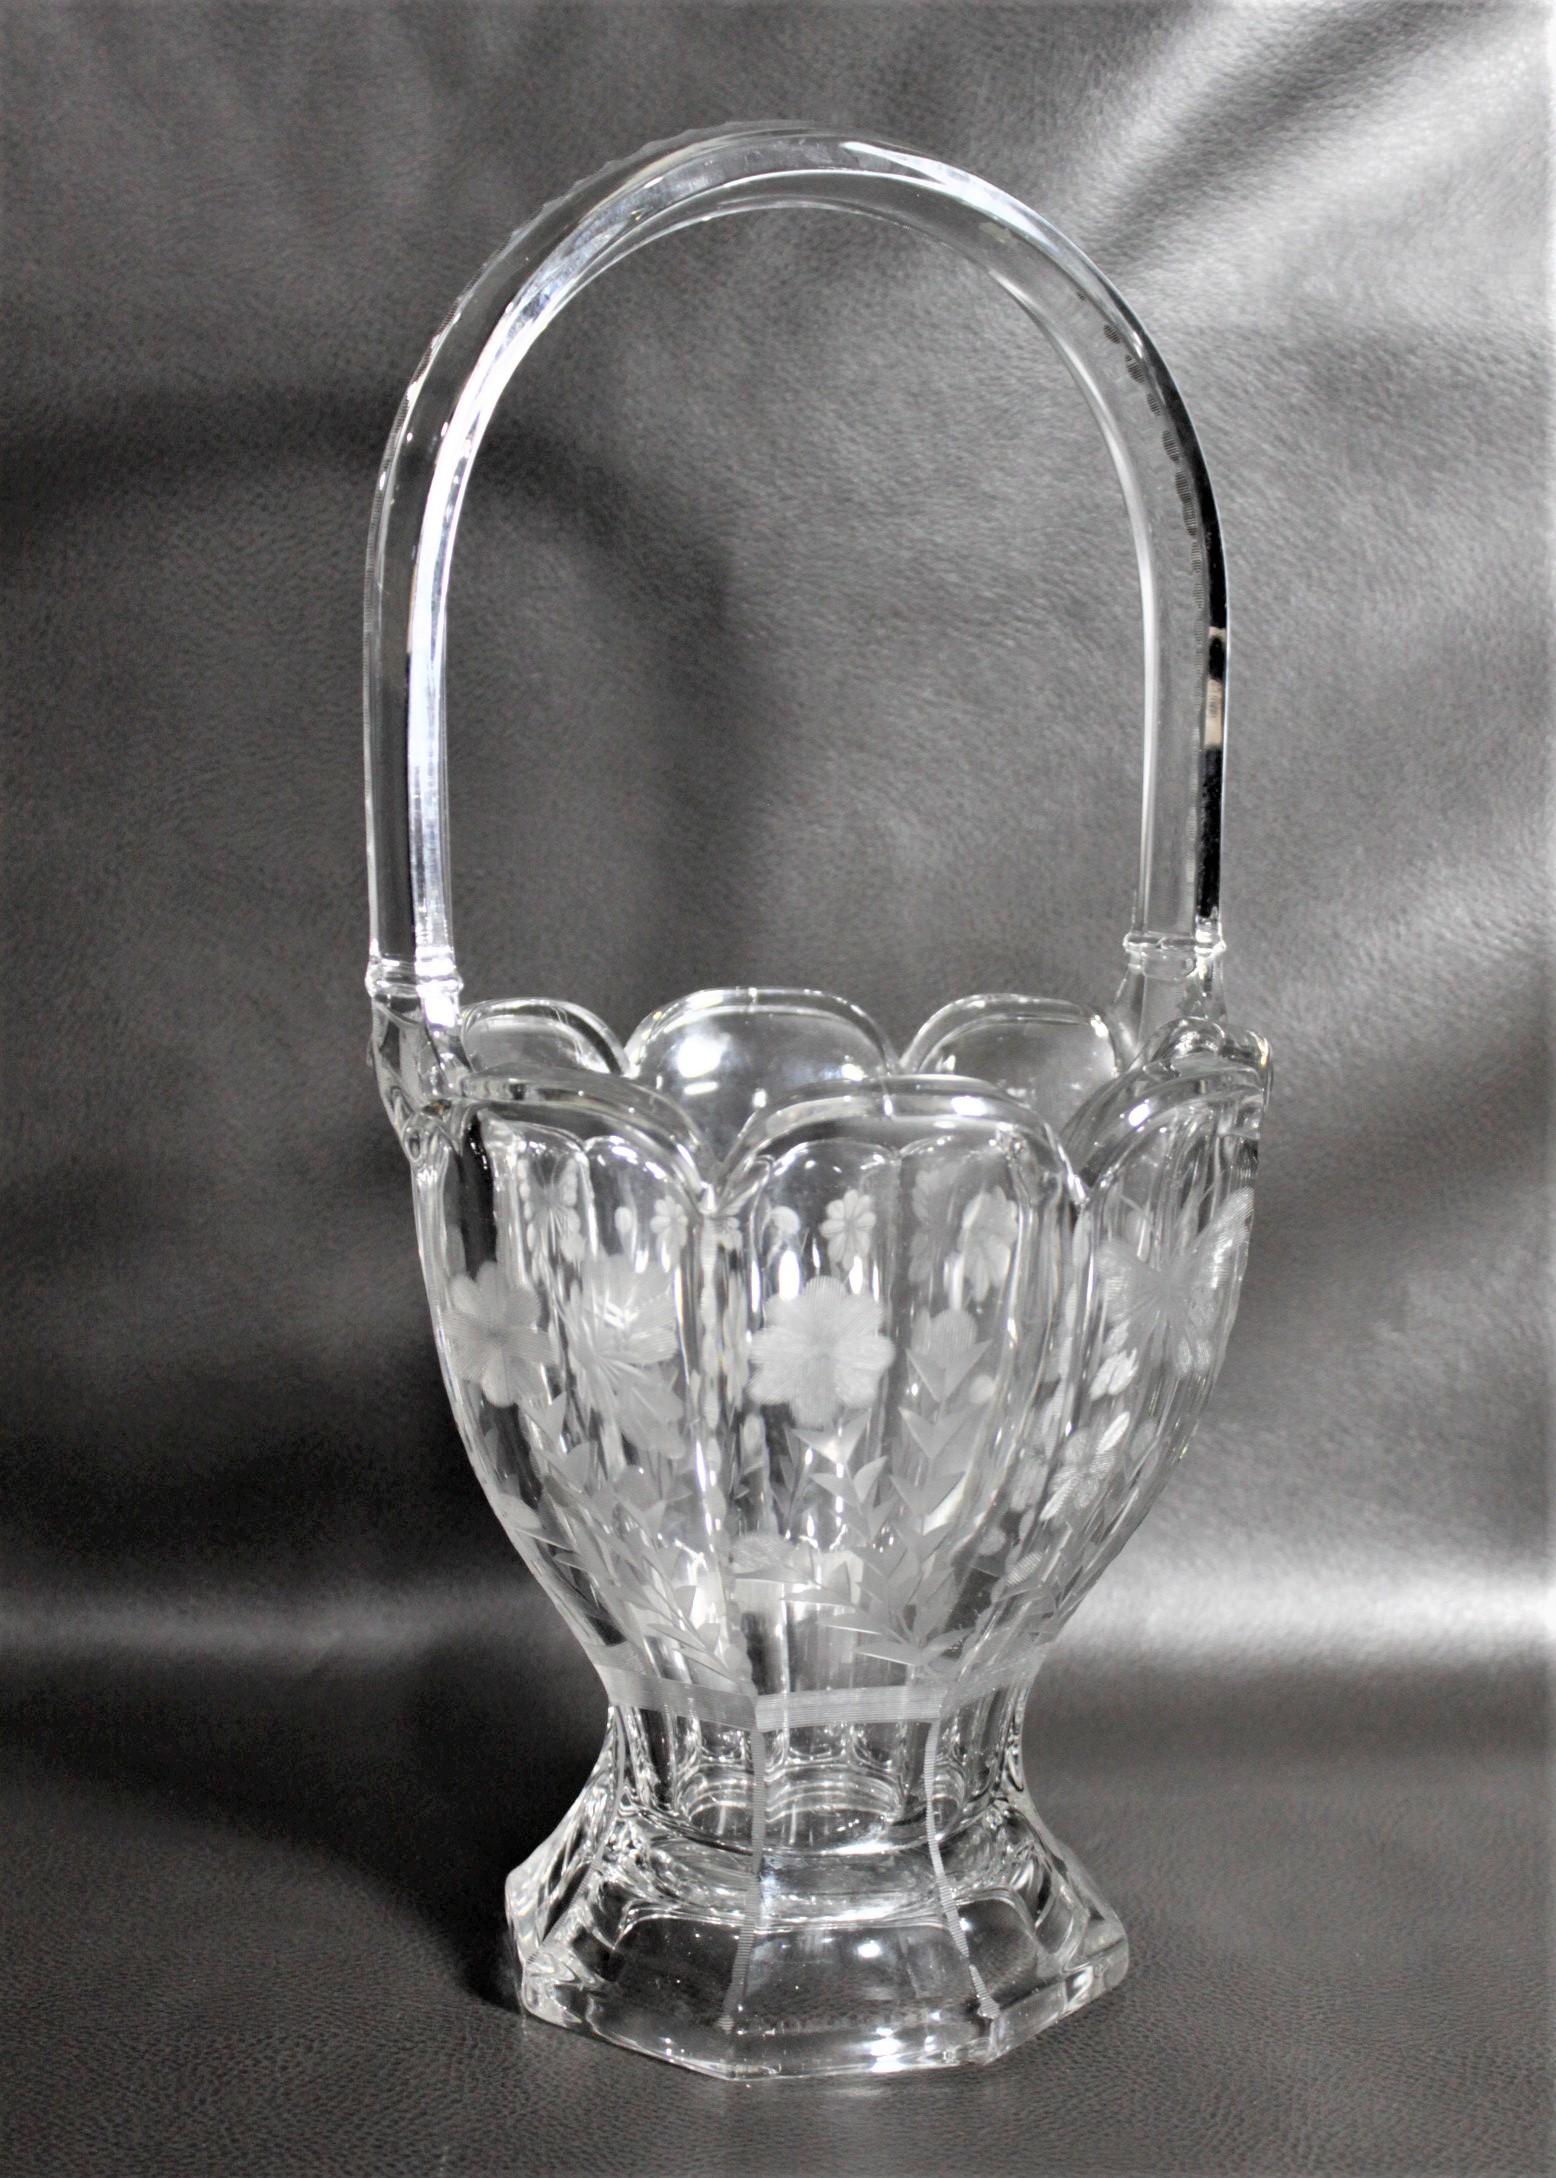 This large crystal basket vase was made by the well known Heisey Glass Company of the United States in circa 1920. This hexagonal shaped vase has deeply etched flowers on each panel with butterflies, alternating between closed and open wings on each